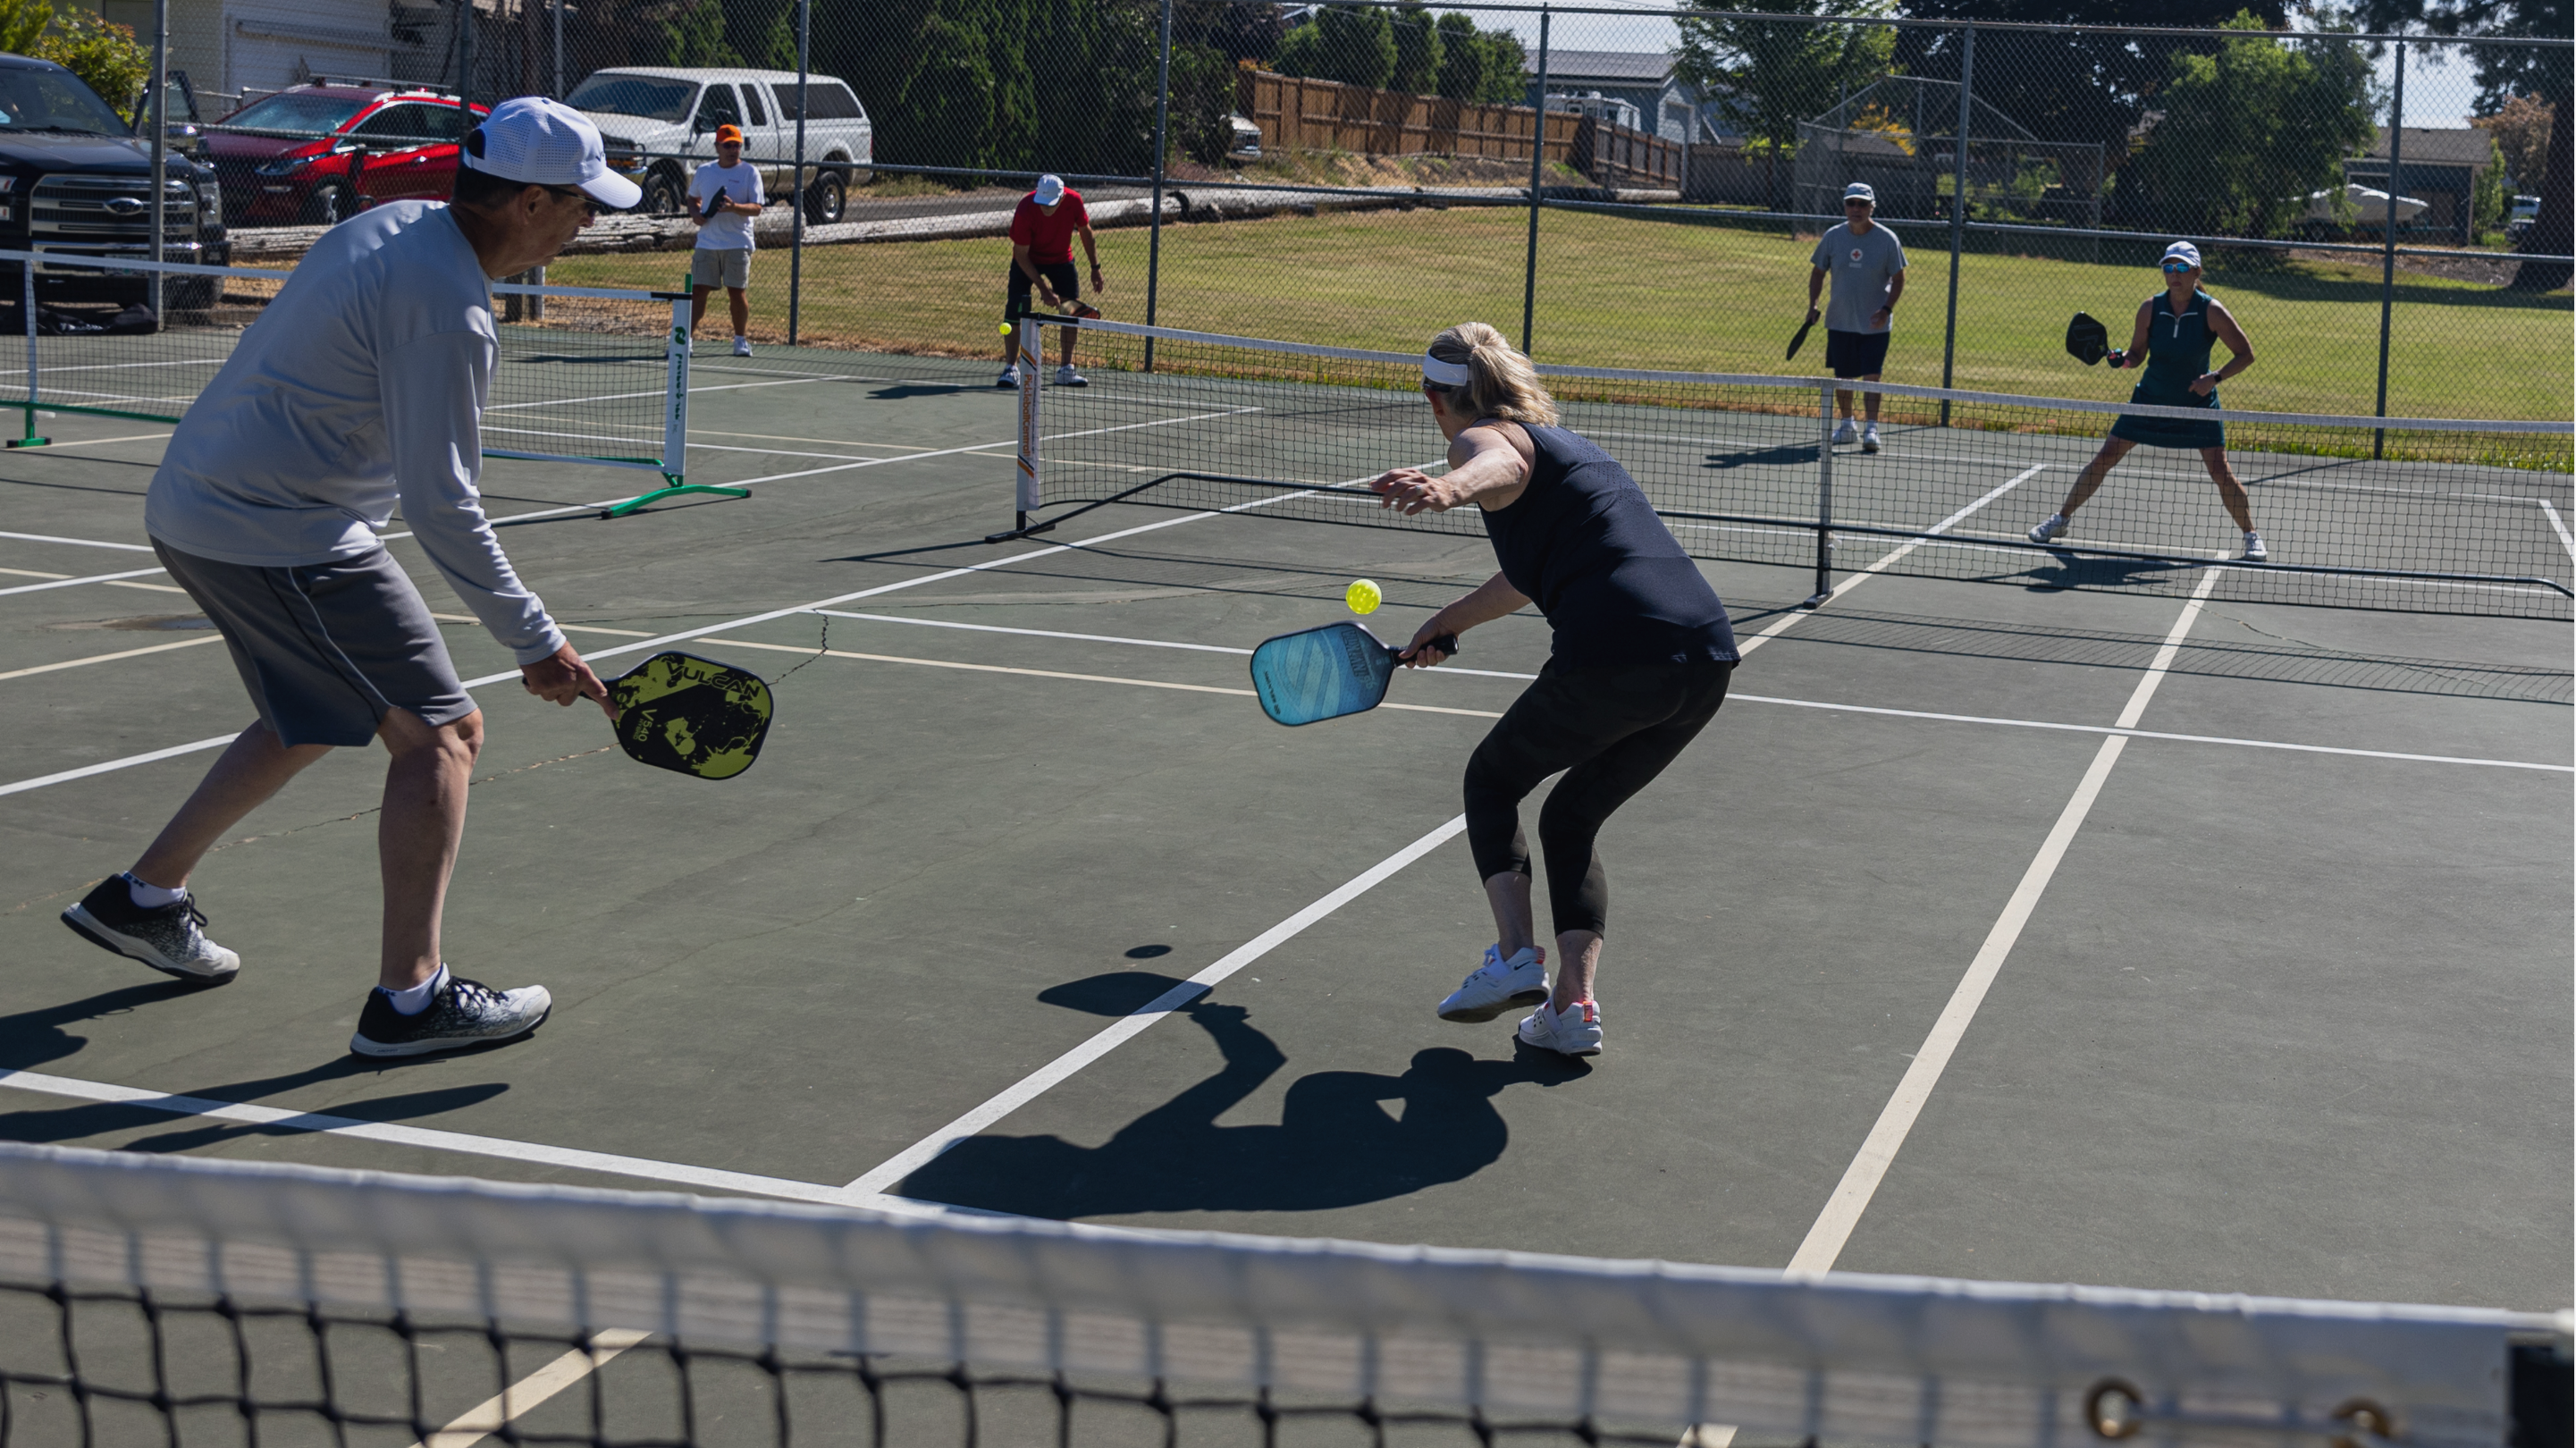 Calling the Courthouse Pickleball Community!